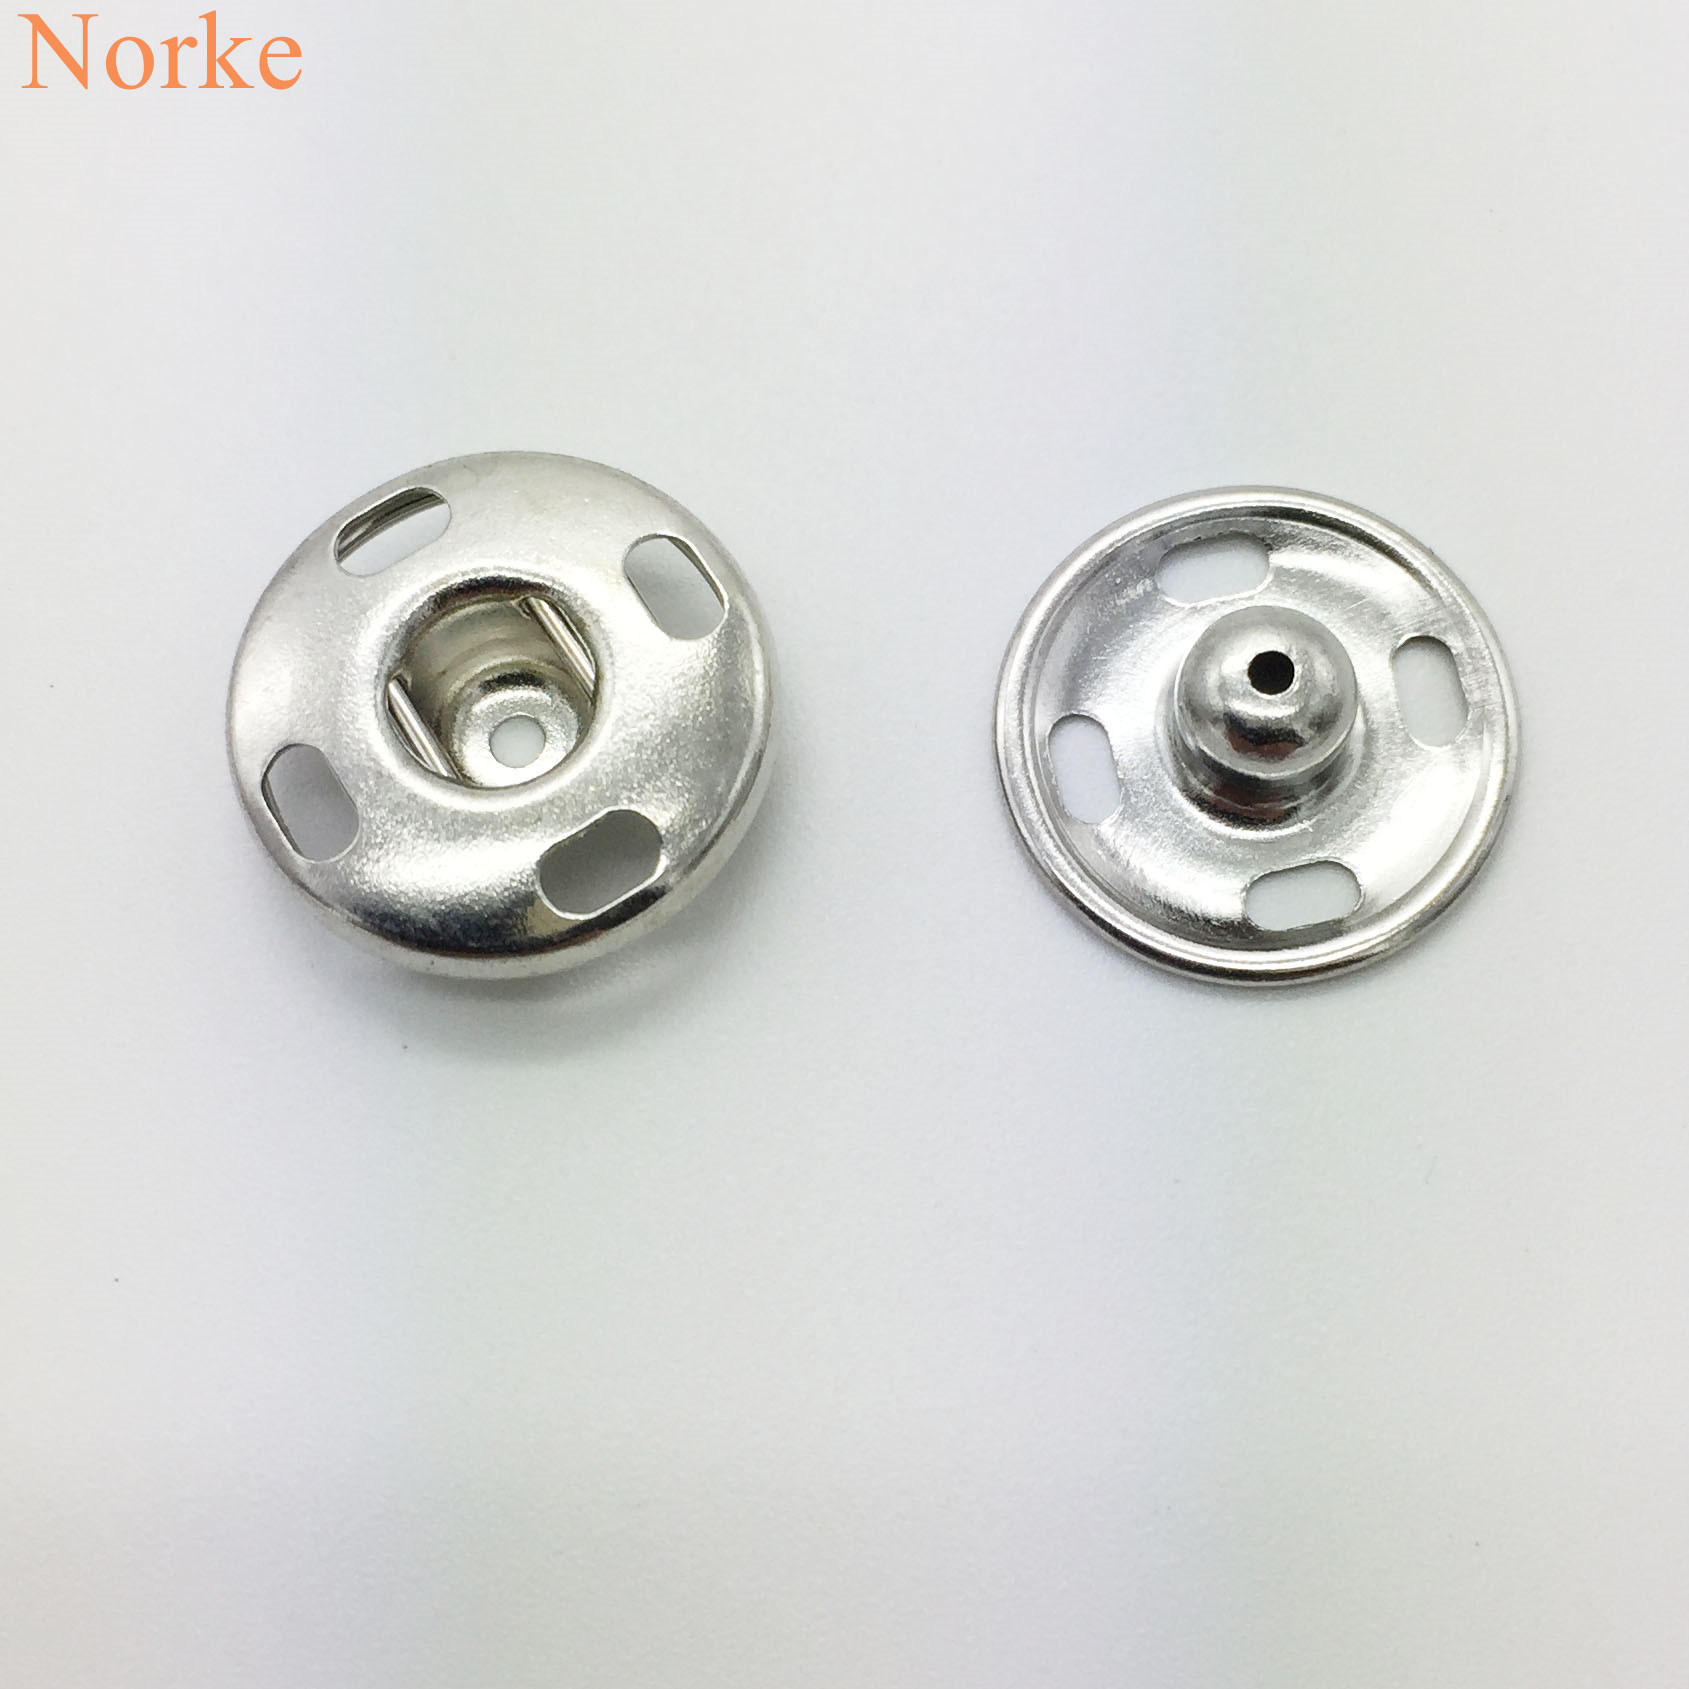 Garment Accessories Metal Button Sewing Spring Snap Button